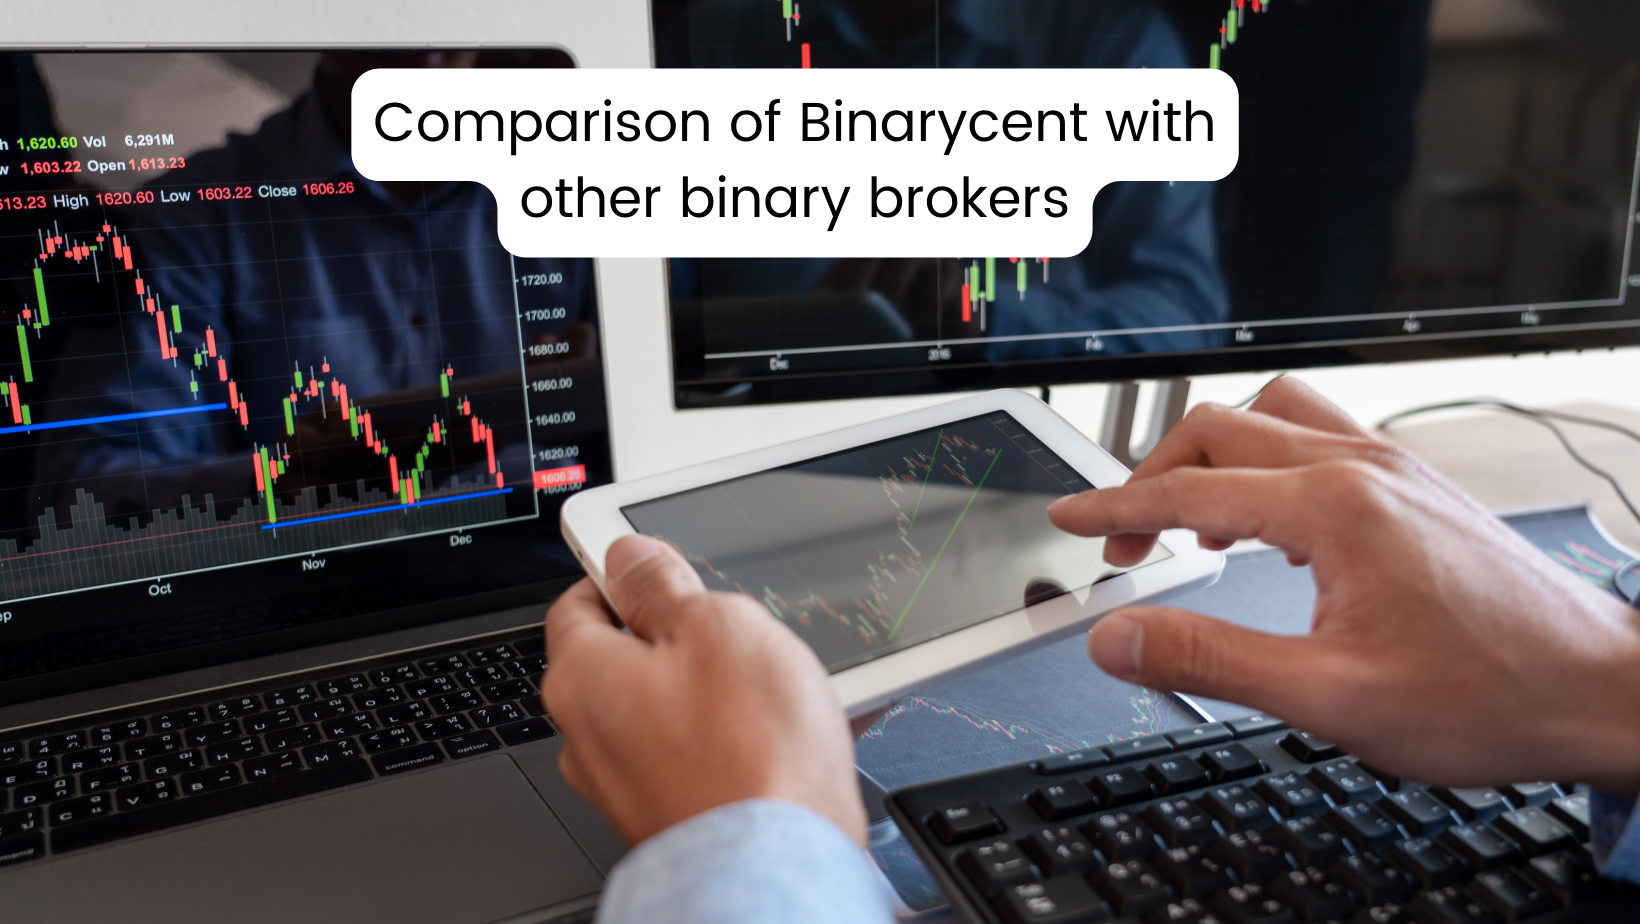 Comparison of Binarycent with
other binary brokers